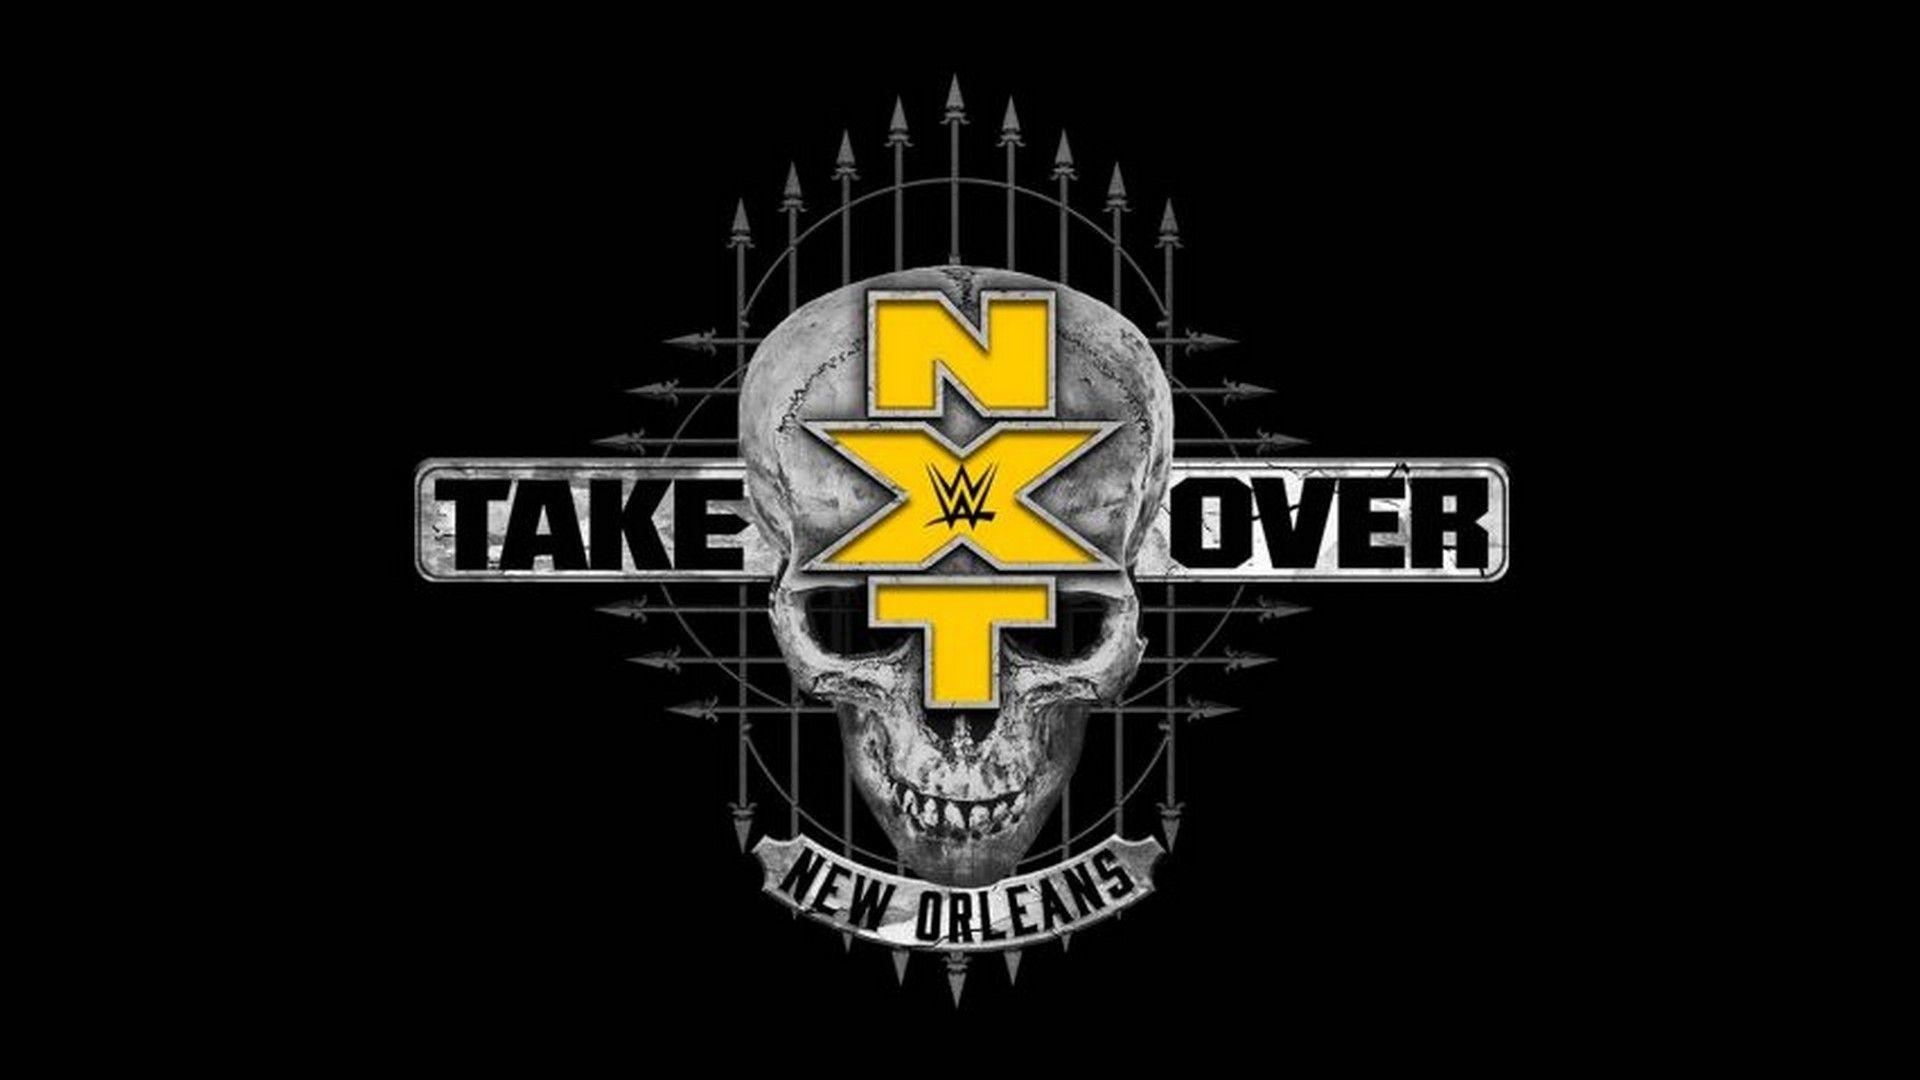 Wallpaper HD NXT WWE. Nxt takeover, Wwe, New orleans